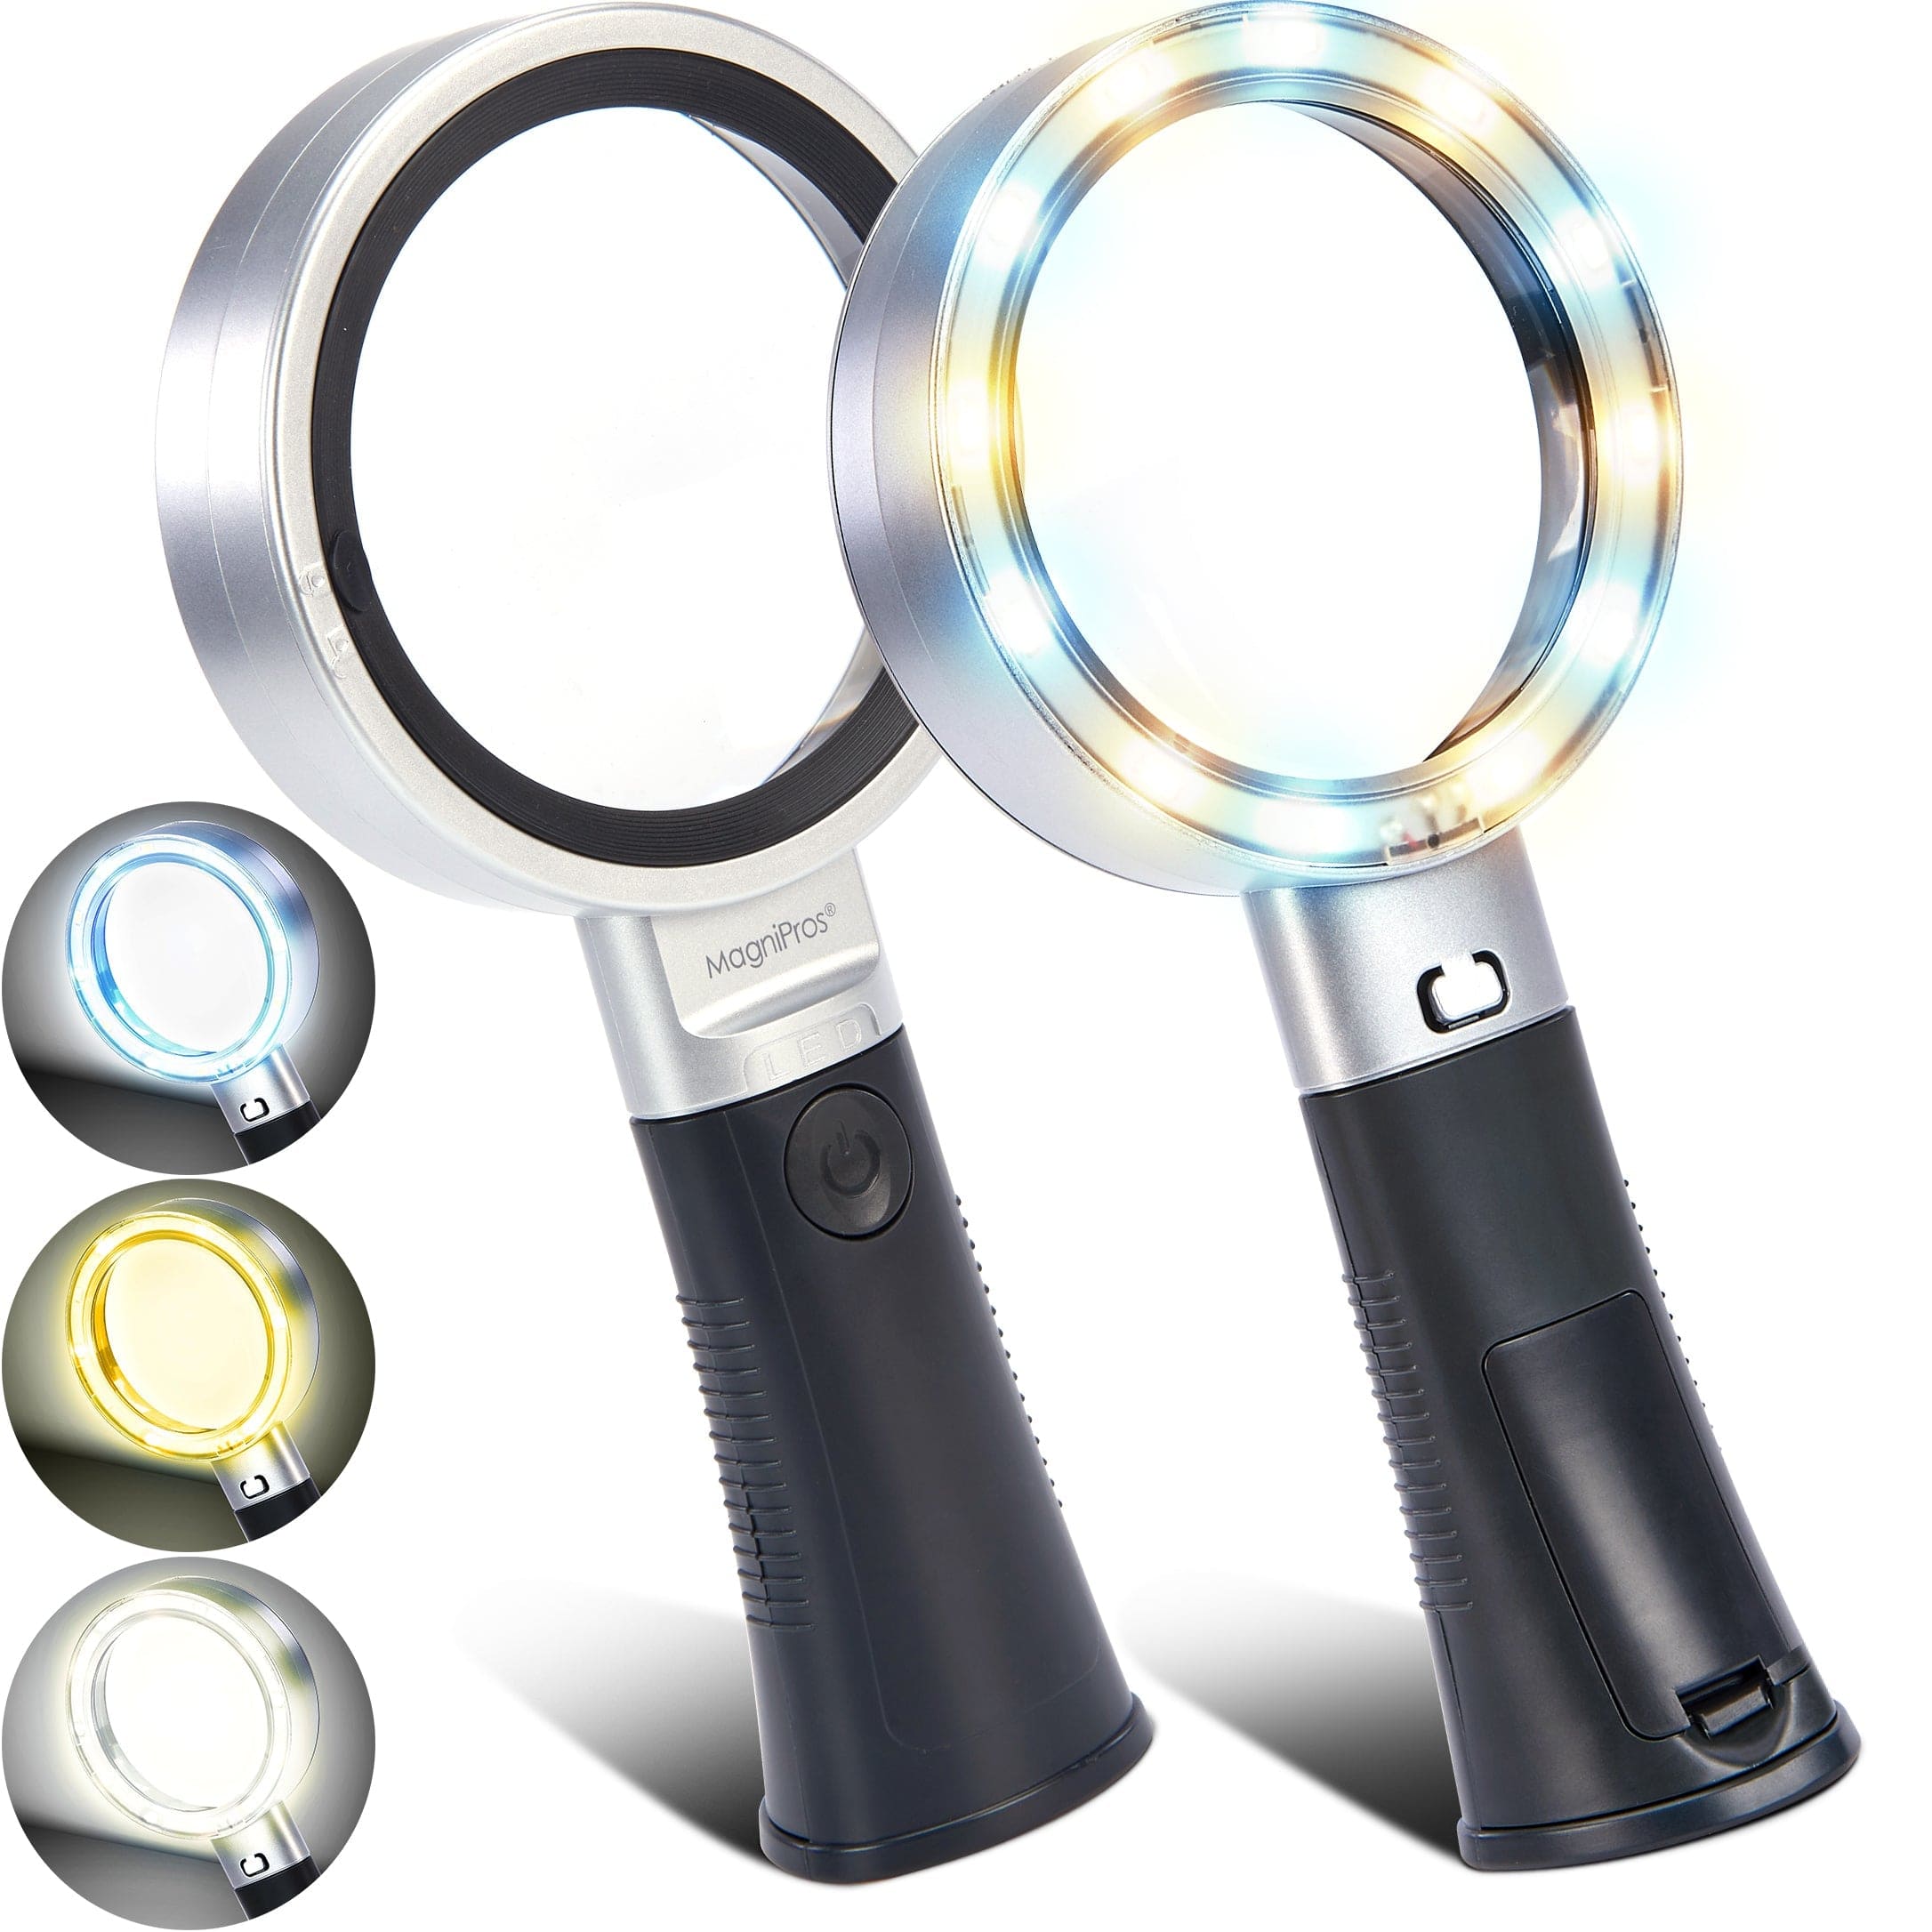 MagniPros Magnifiers 10X Magnifying Glass with Lights-Non Slip Ergonomic Standing Handle